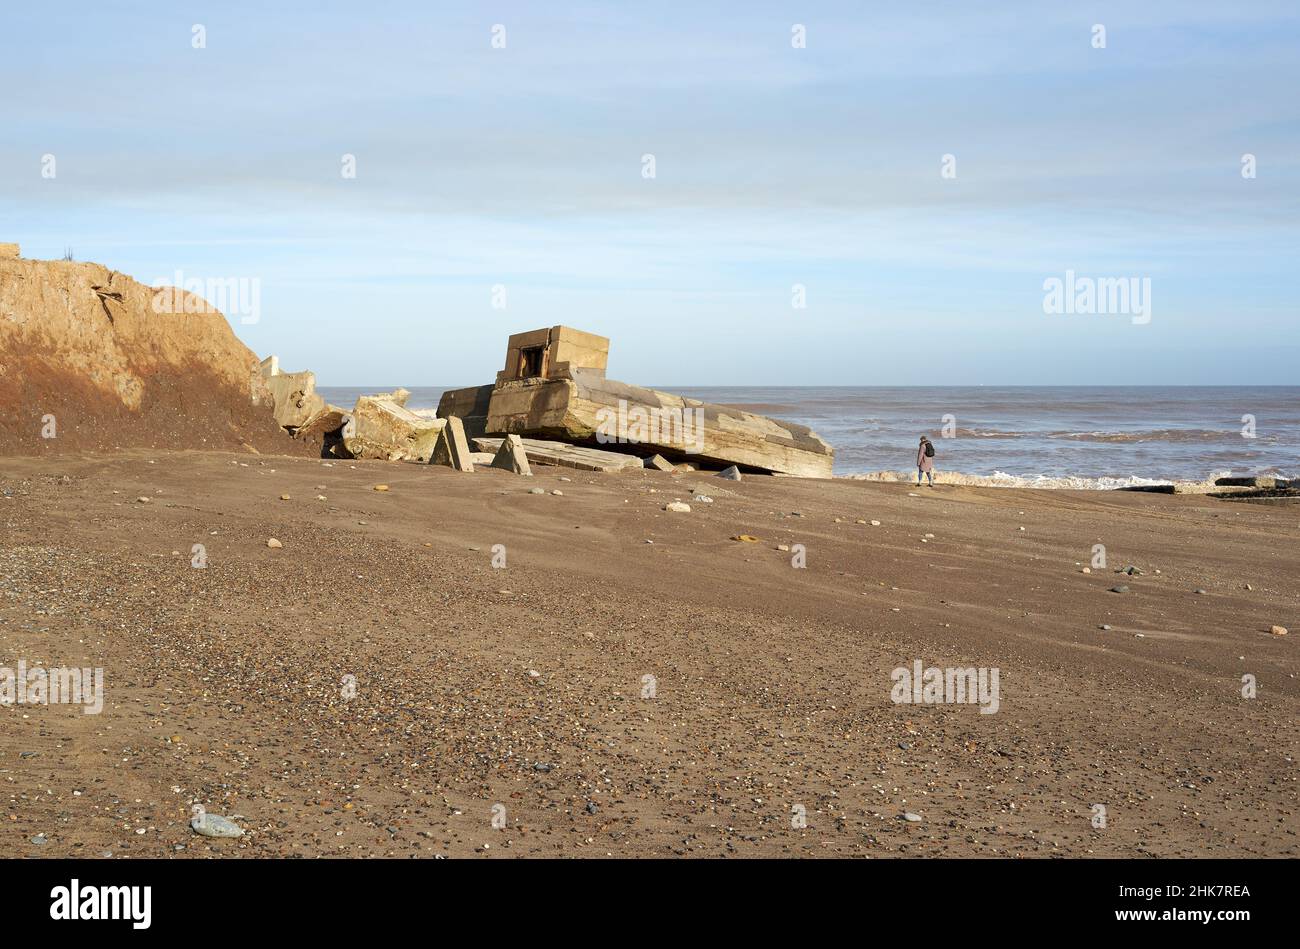 Collapsed WW2 bunker on a beach Stock Photo